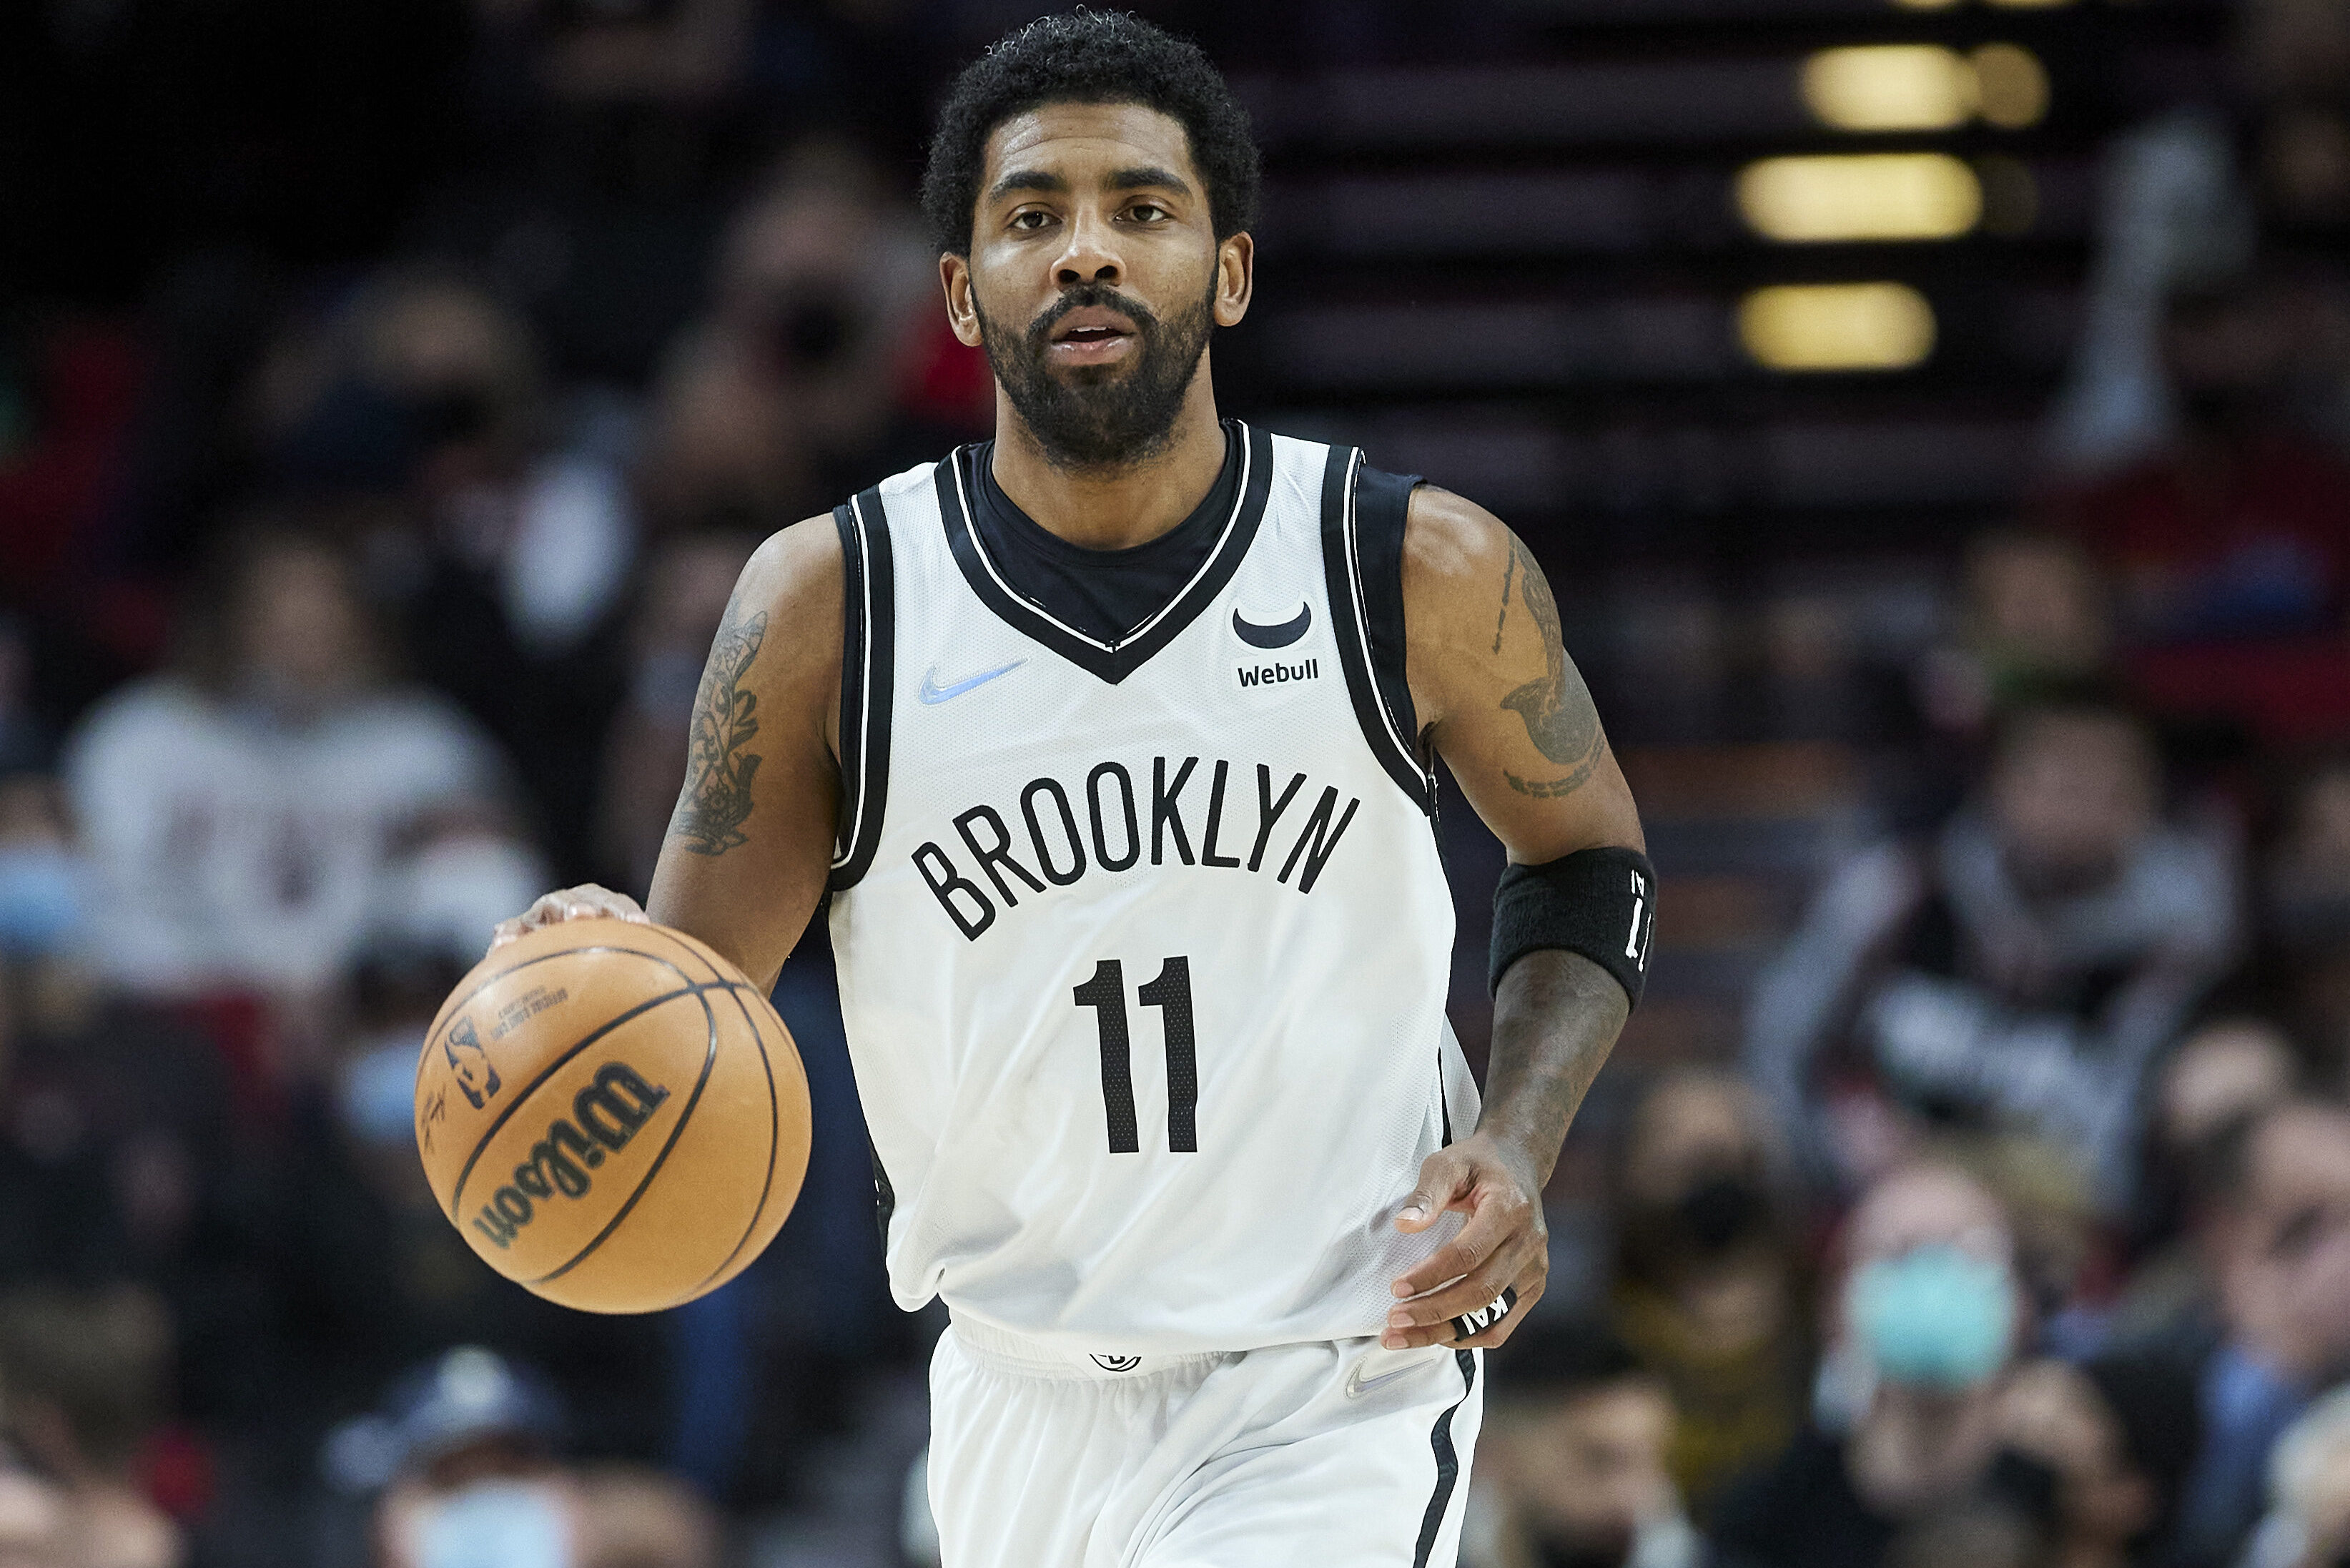 Woj: Nets Have 'Real Optimism' Kyrie Irving Could Be Full-Time Player This Season